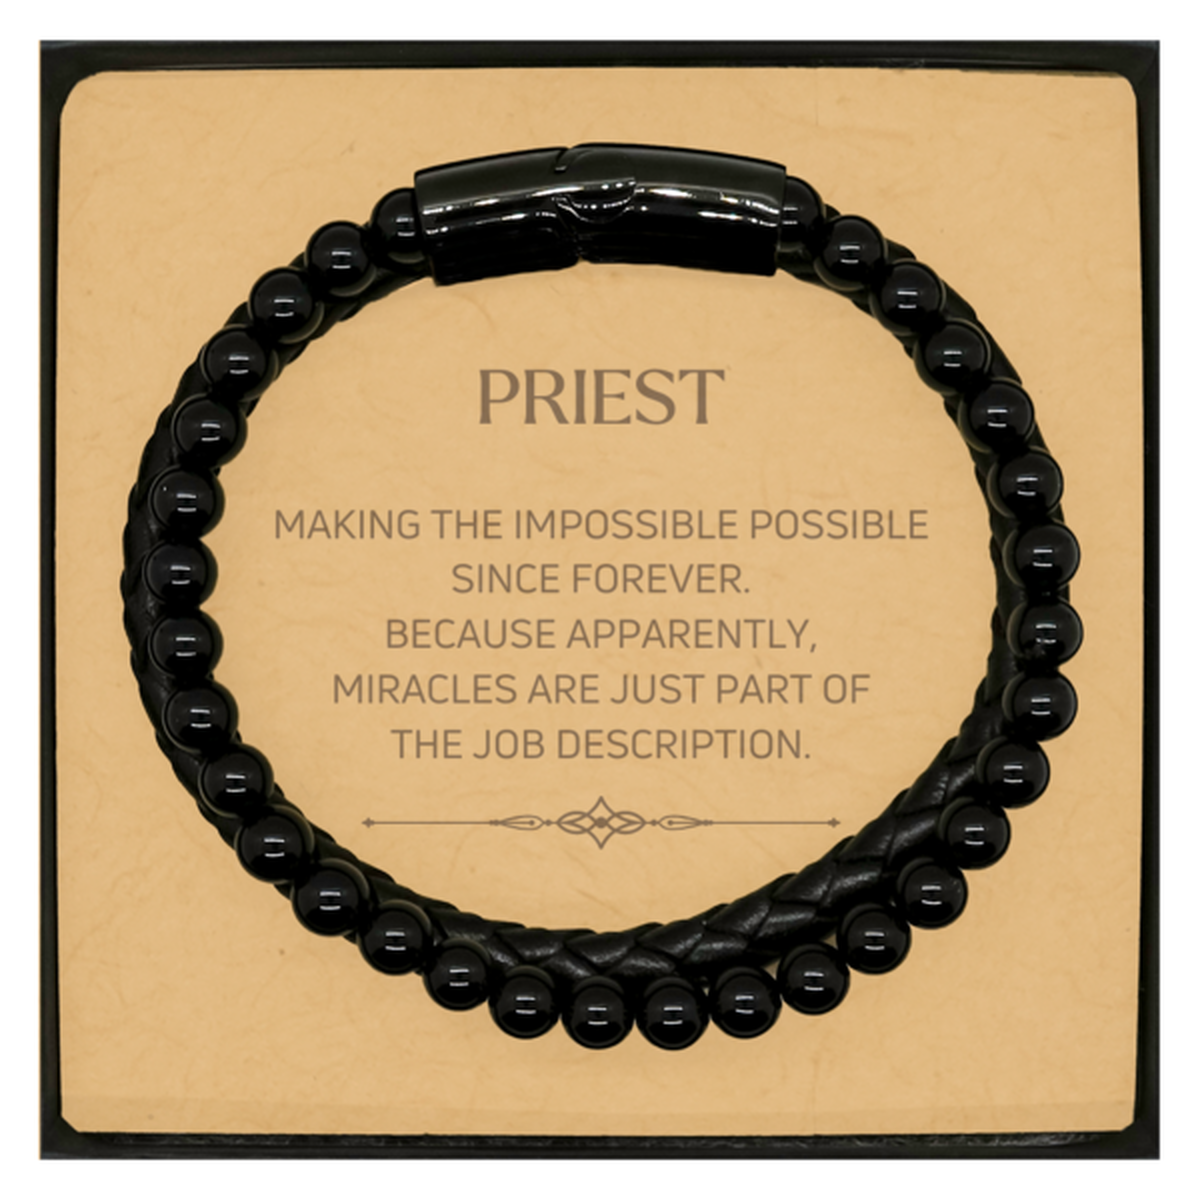 Funny Priest Gifts, Miracles are just part of the job description, Inspirational Birthday Christmas Stone Leather Bracelets For Priest, Men, Women, Coworkers, Friends, Boss